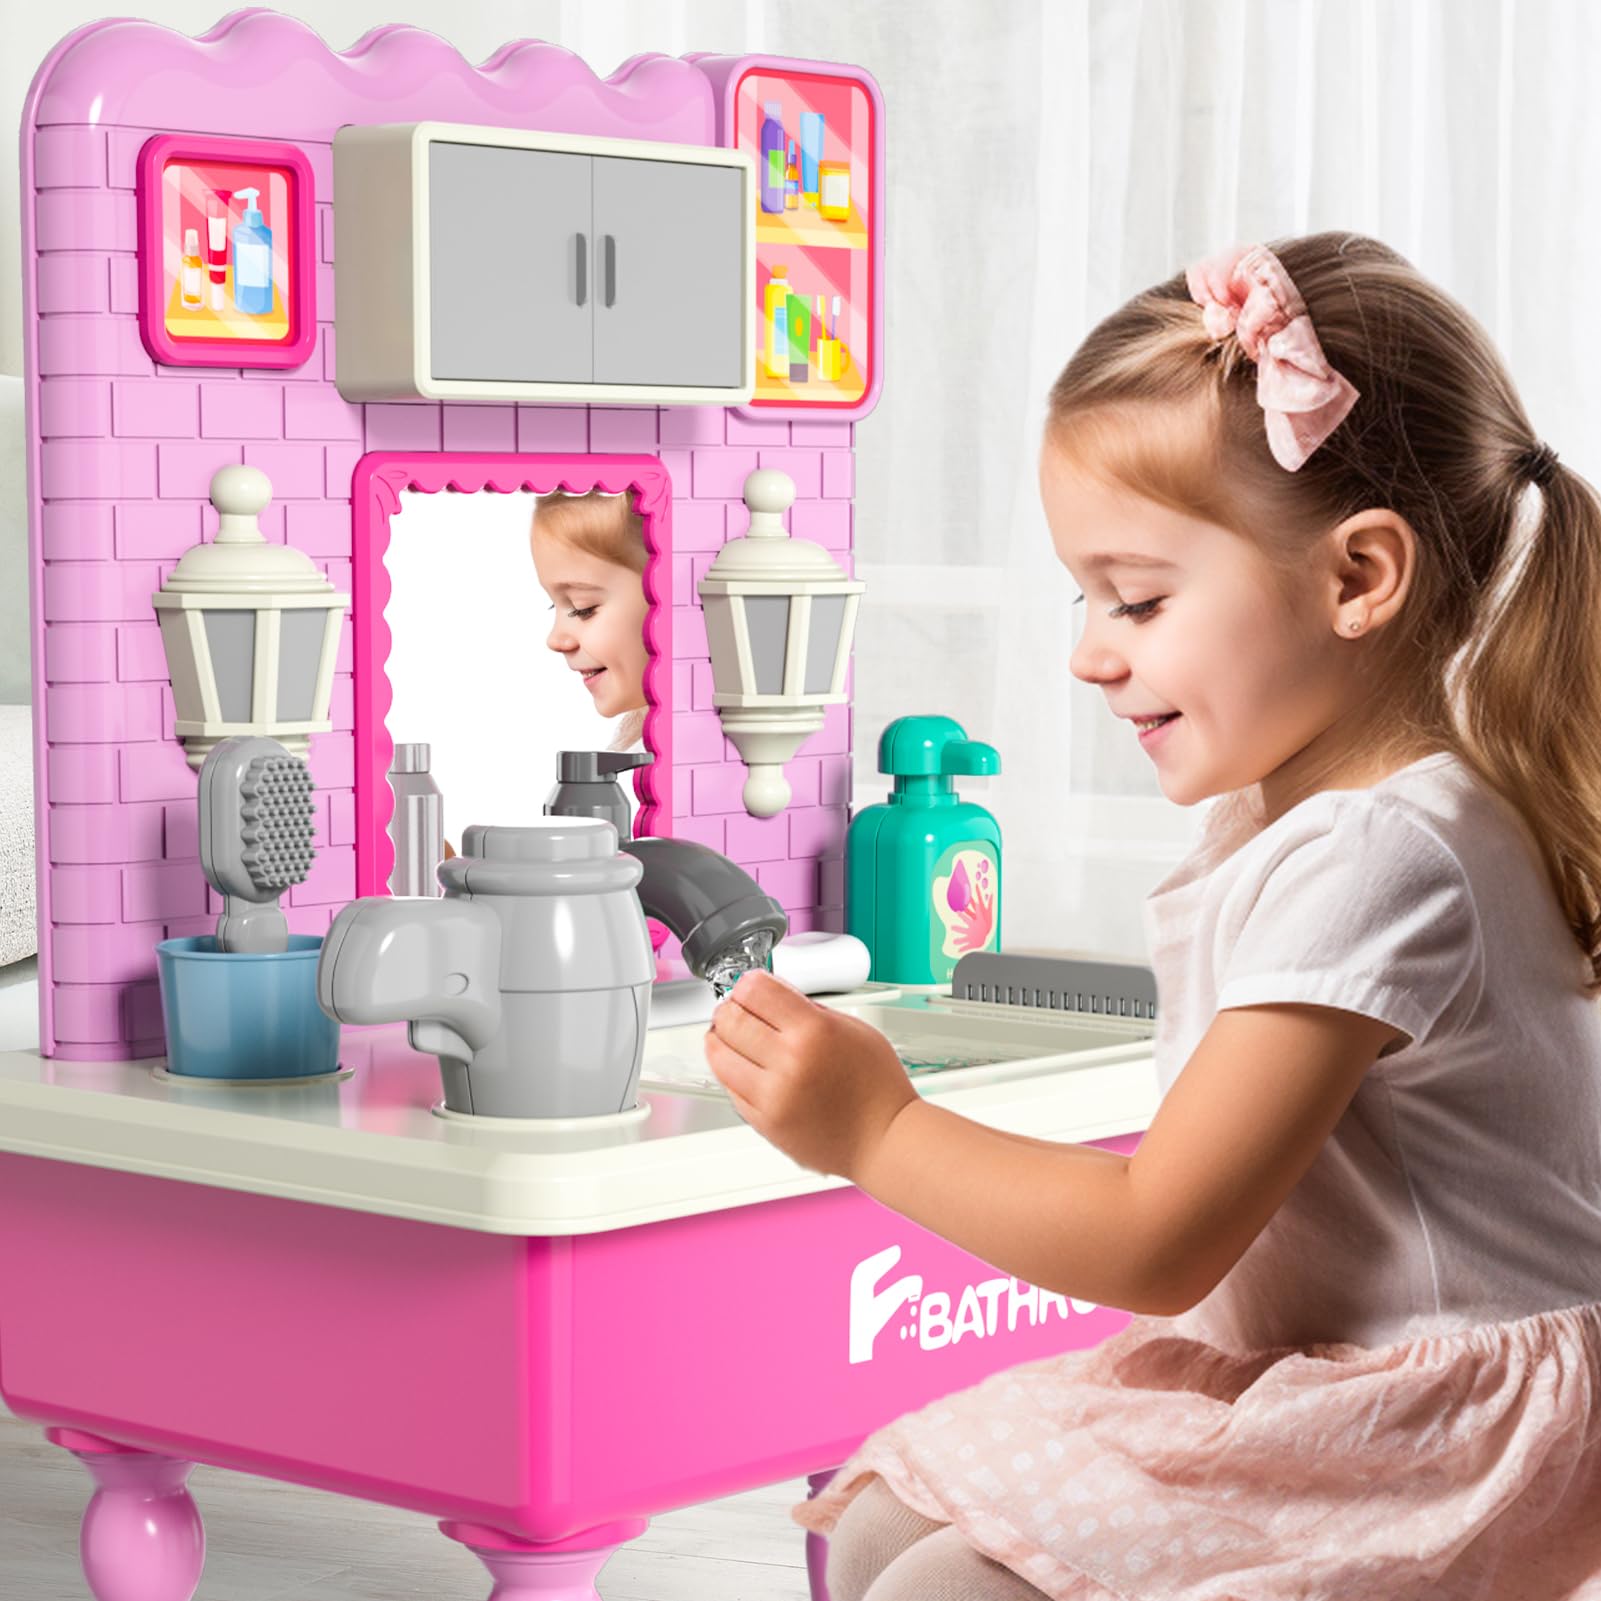 Lucky Doug Pretend Play Sink Toys for Kids, Bathroom Sink Toy with Running Water, Girls Vanity with Mirror and Stool for Kids Ages 3 4 5 6 7 Year olds